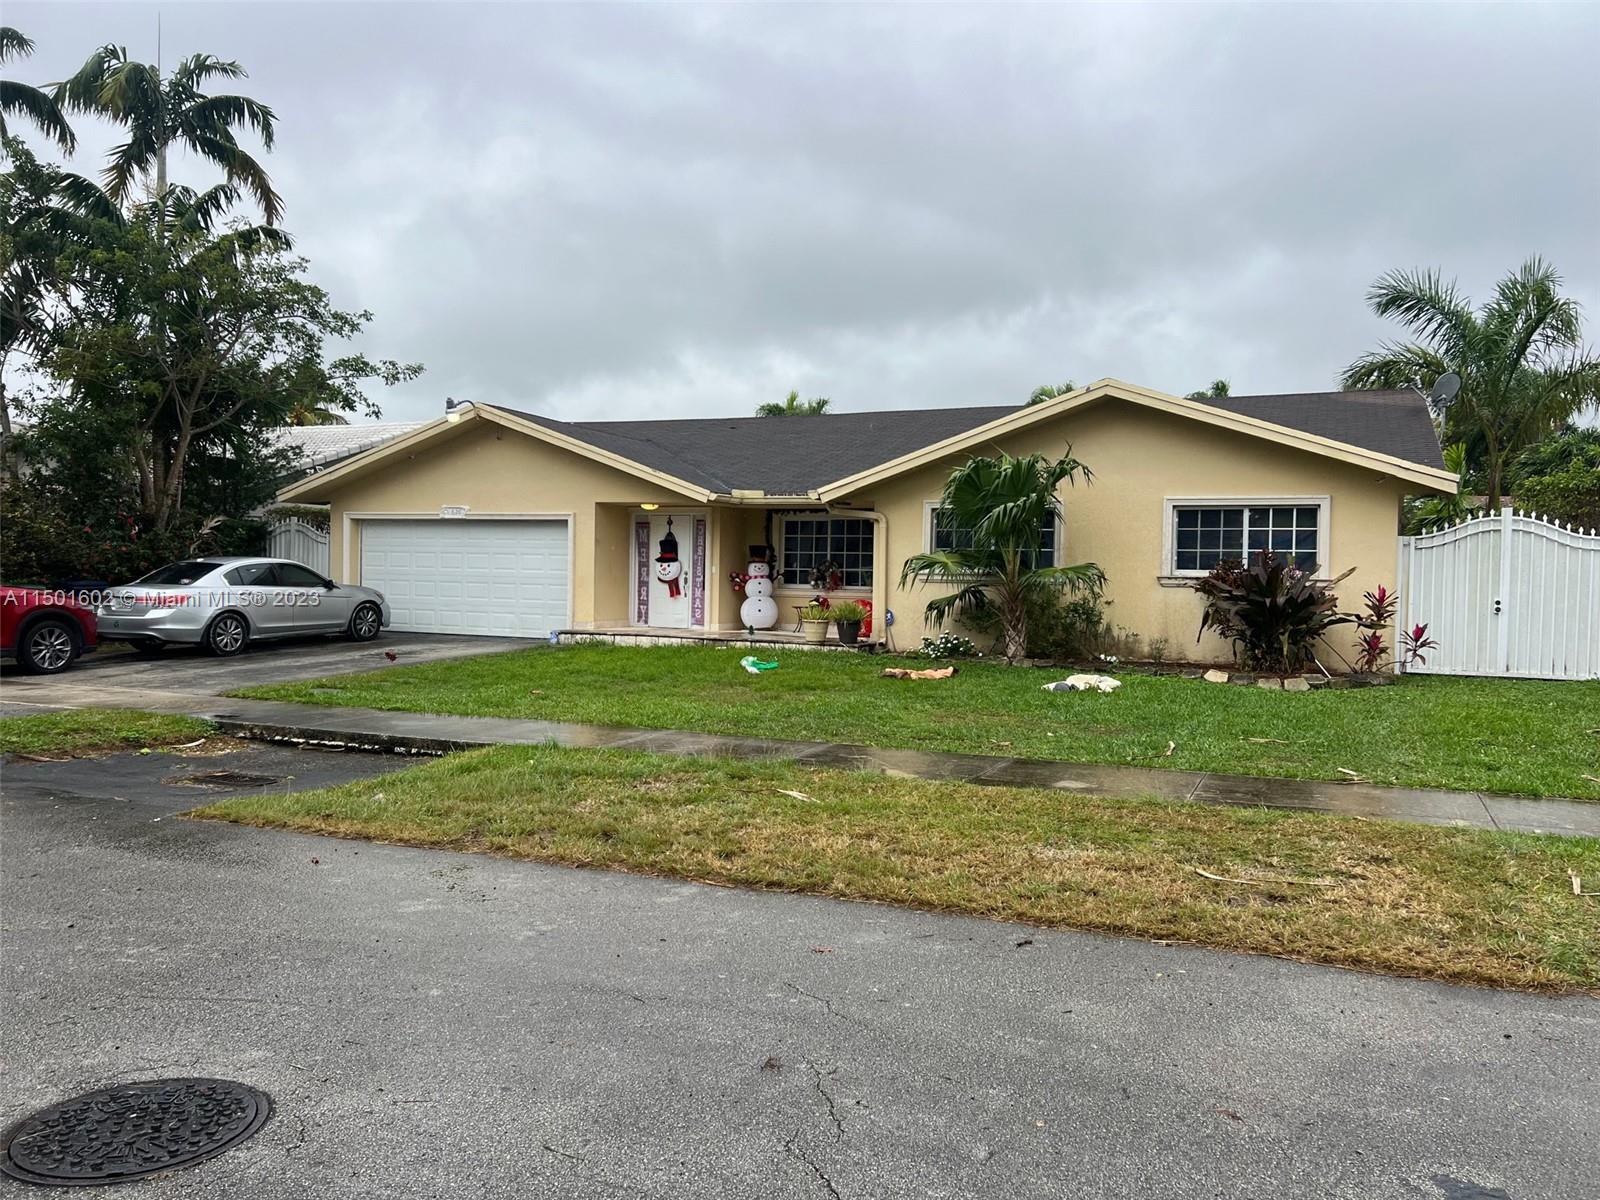 10620 SW 146th Ct, Miami, Florida 33186, 4 Bedrooms Bedrooms, ,2 BathroomsBathrooms,Residential,For Sale,10620 SW 146th Ct,A11501602